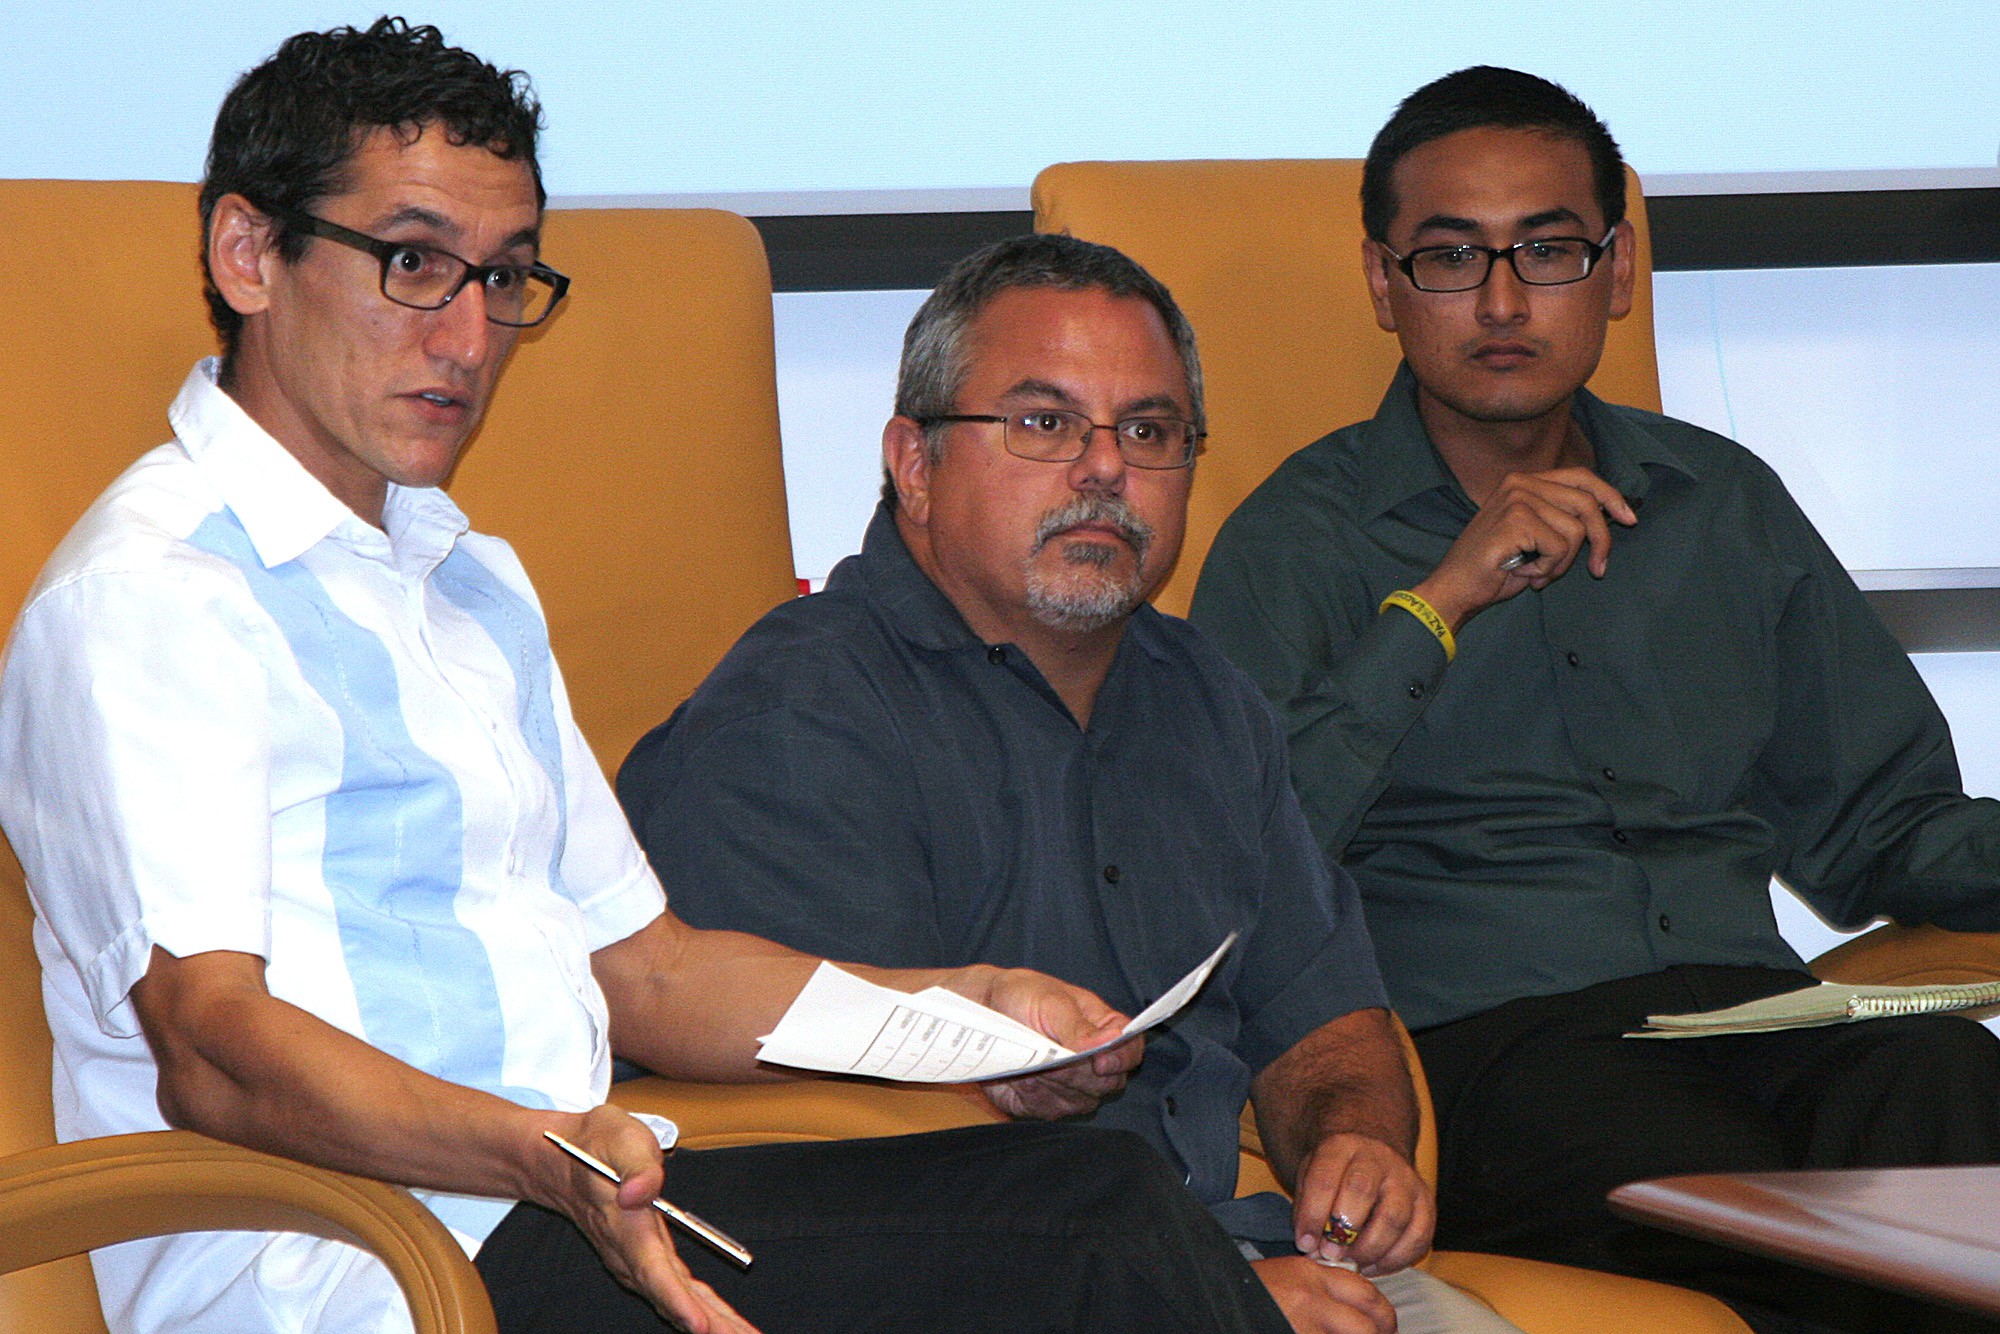 (From left) Rodolfo Espino, an associate professor in Arizona State University's School of Politics and Global Studies, Gary Segura, professor of American politics and Chair of Chicano/a-Latino/a Studies at Stanford University, and Daniel Rodriguez, a founder of the Arizona Dream Act Coalition, speak at a news conference analyzing results of a poll of Latino voters. Segura is a principal with the firm that conducted the poll.